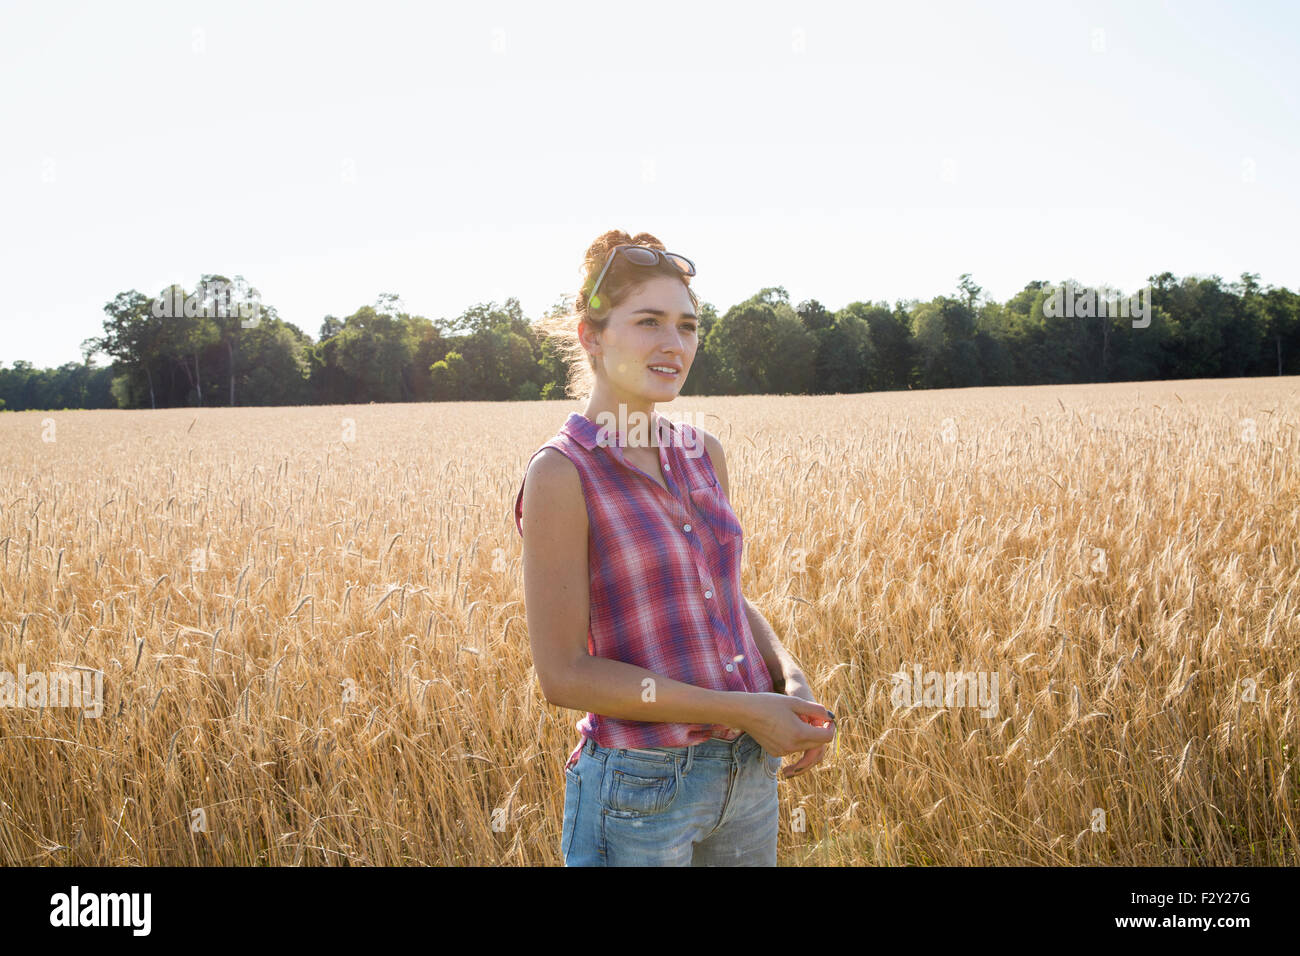 Young woman wearing a checkered shirt standing in a cornfield. Stock Photo